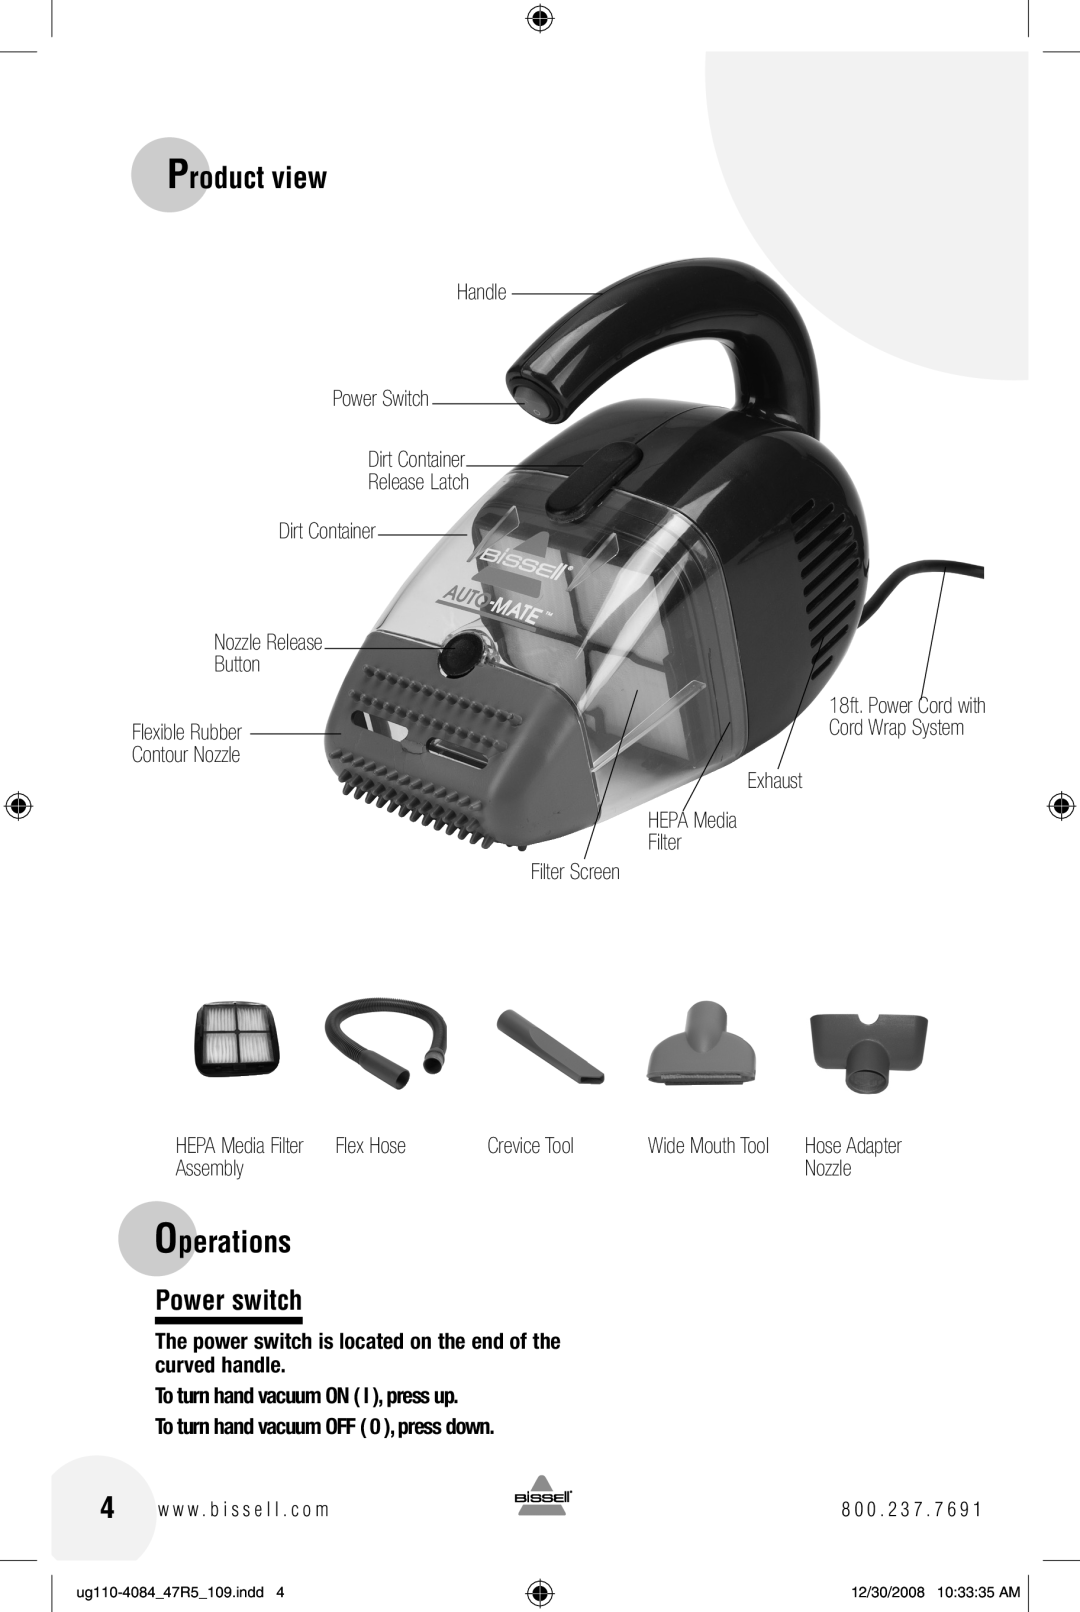 Bissell 47R5 warranty Product view, Operations, Power switch, The power switch is located on the end of the curved handle 